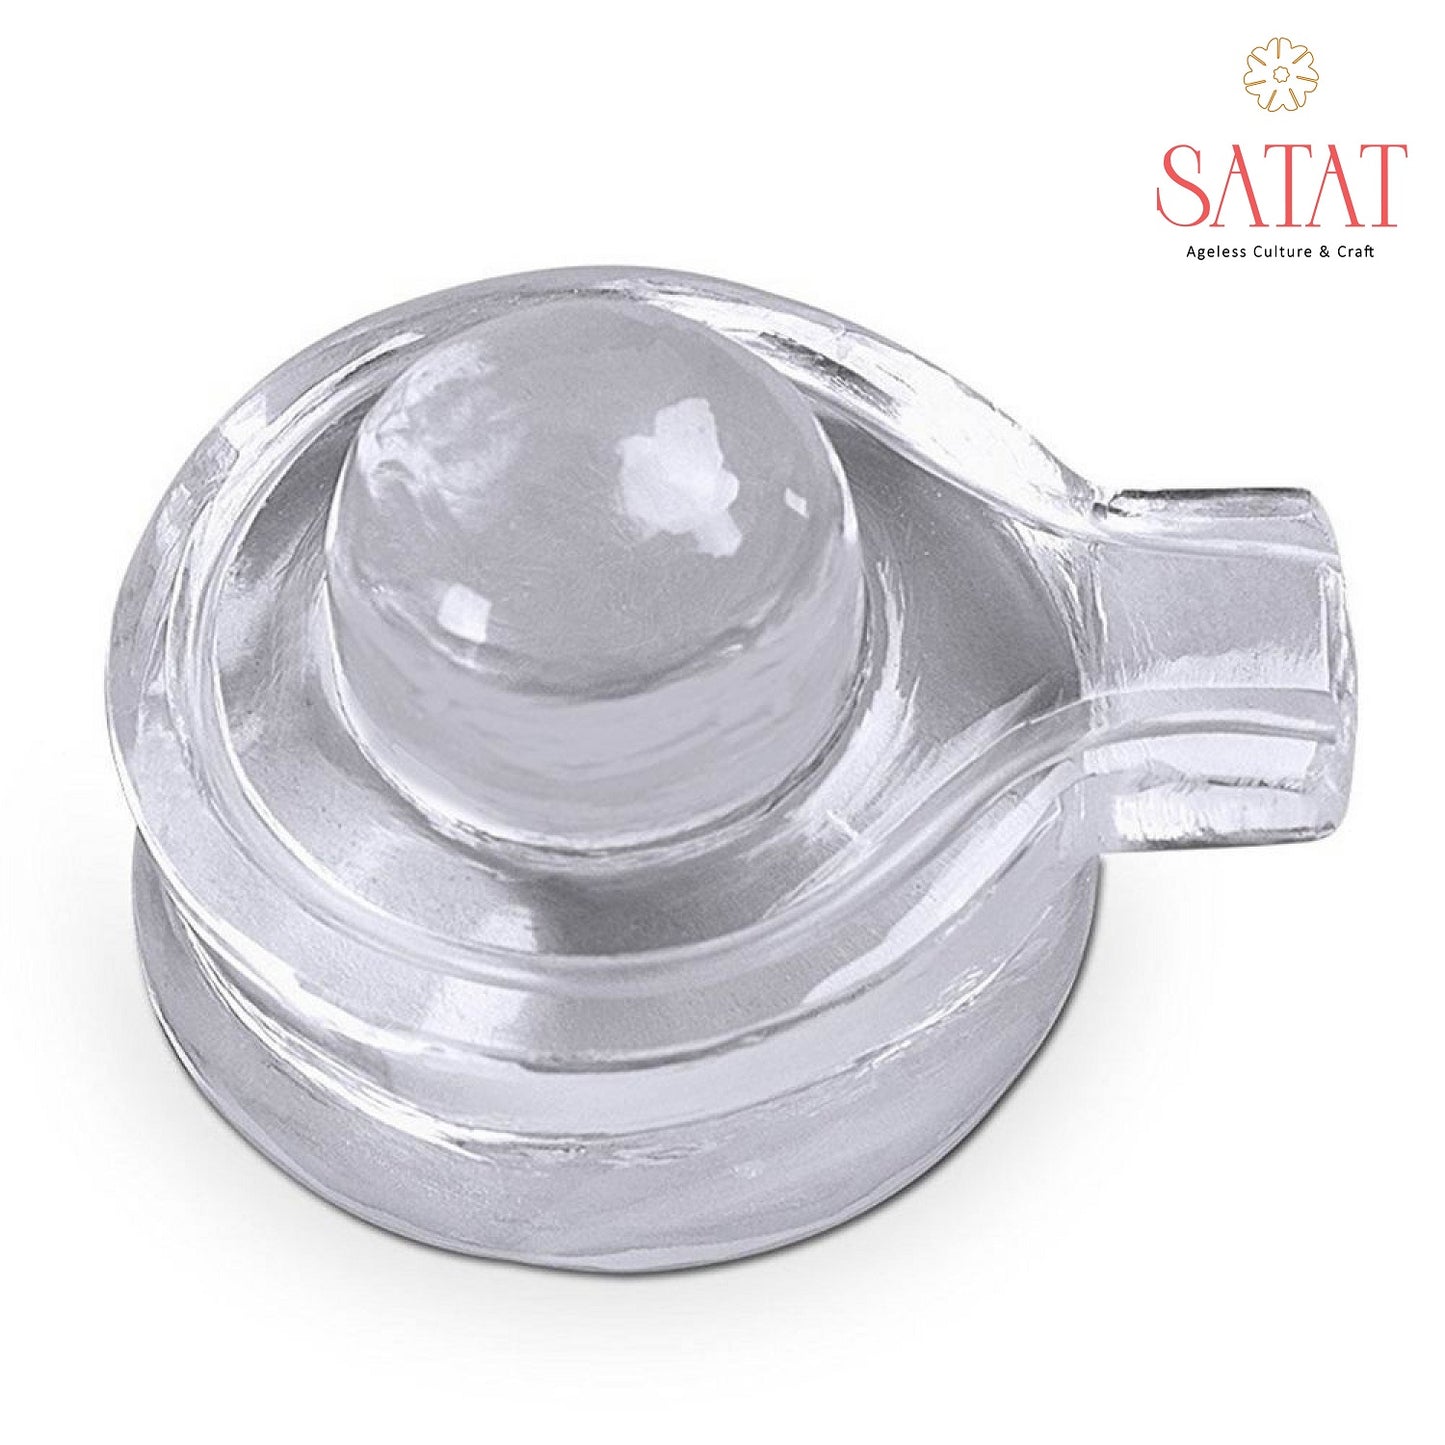 Ease your spiritual Journey by worshiping this Pious Pure Crystal Shivlingam &amp; delve in divine peace. This sacred Sphatik Crystal Shivling is made for Offering your daily Puja.